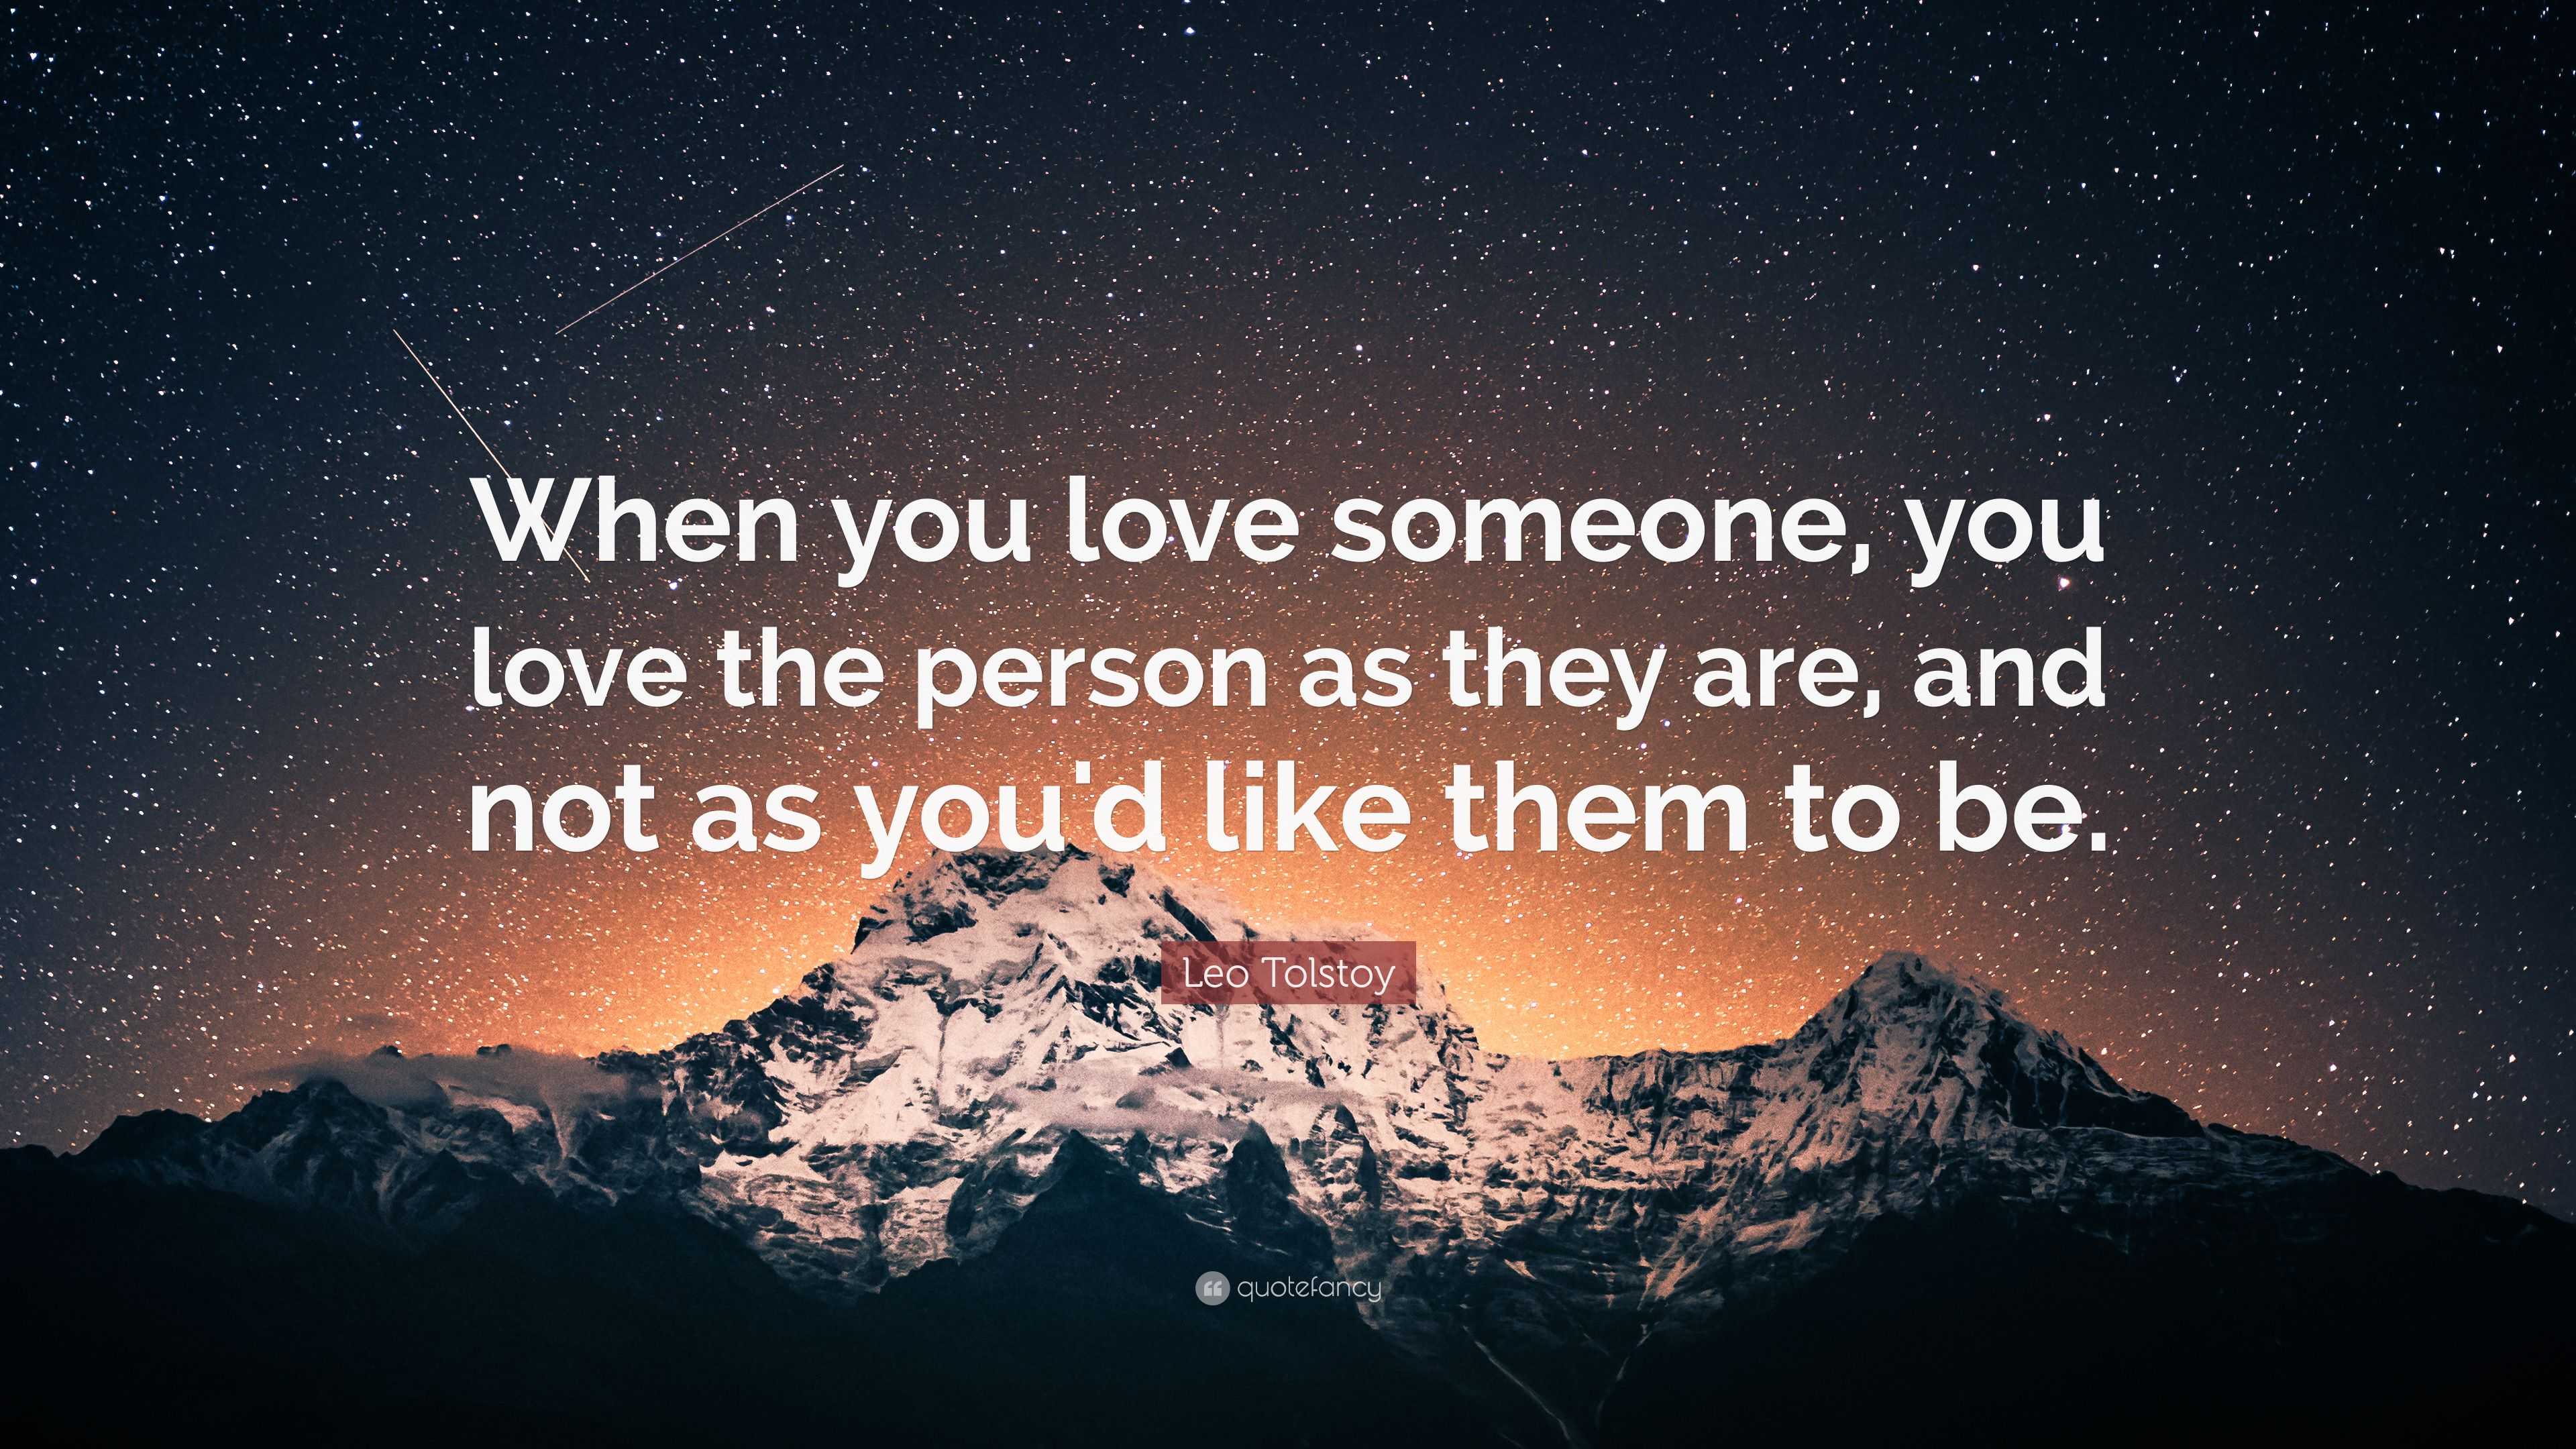 Leo Tolstoy Quote: "When you love someone, you love the ...